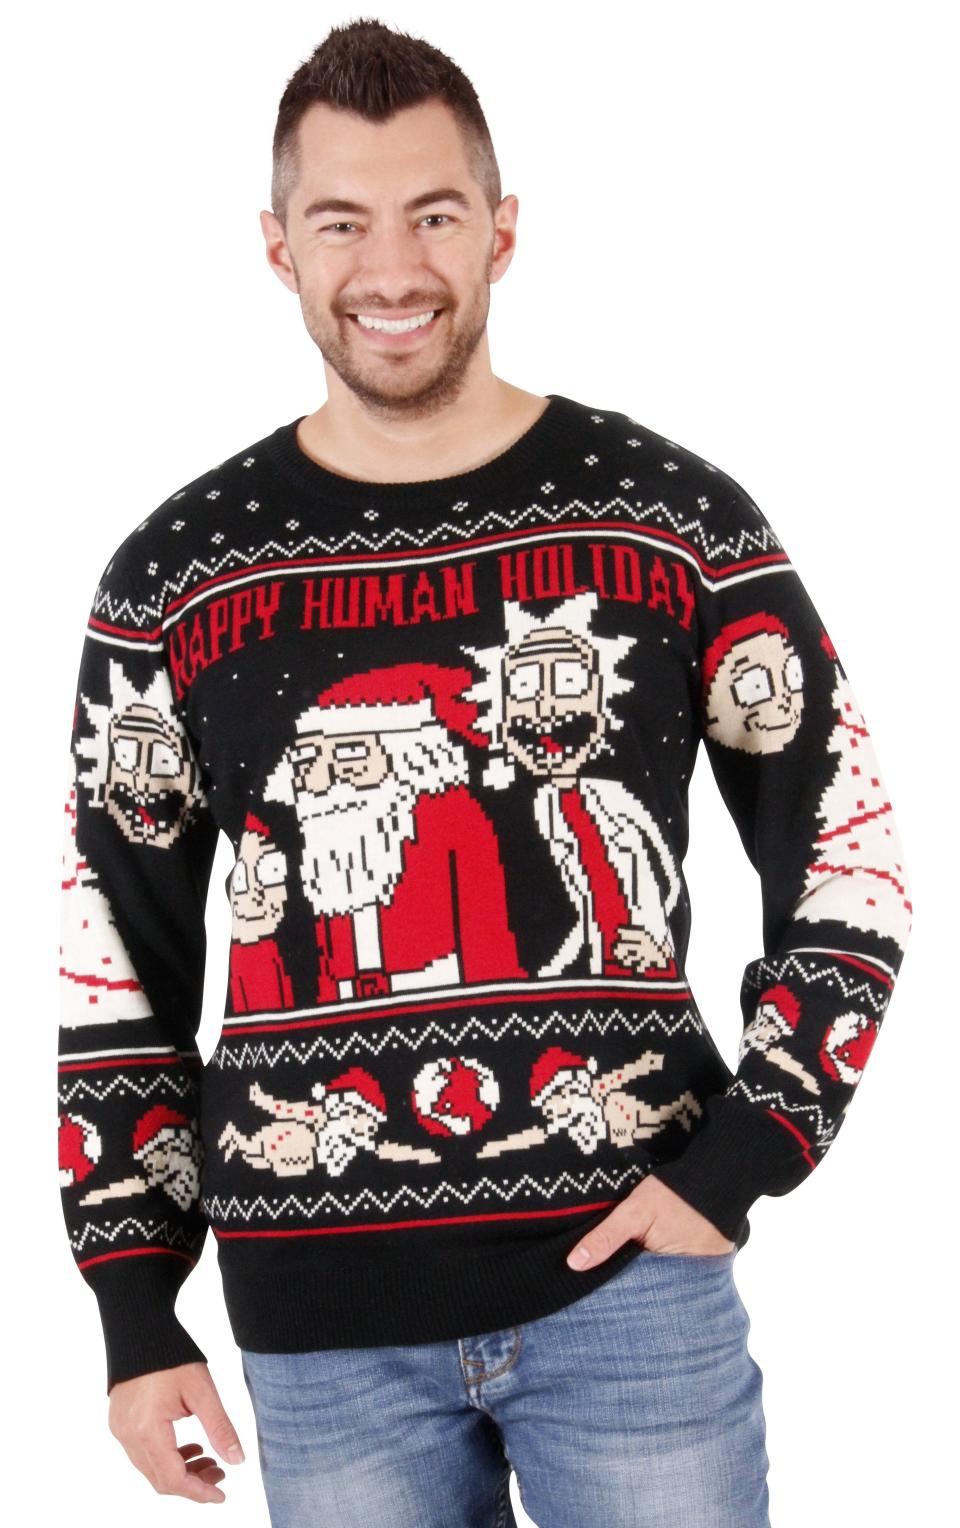 Considering how devoted the "Rick and Morty" fanbase is, I suspect <a href="http://www.uglychristmassweater.com/product/rick-and-morty-happy-human-holiday-ugly-christmas-sweater/" target="_blank">you might be able to sell this</a> for big bucks at any Christmas party you attend.